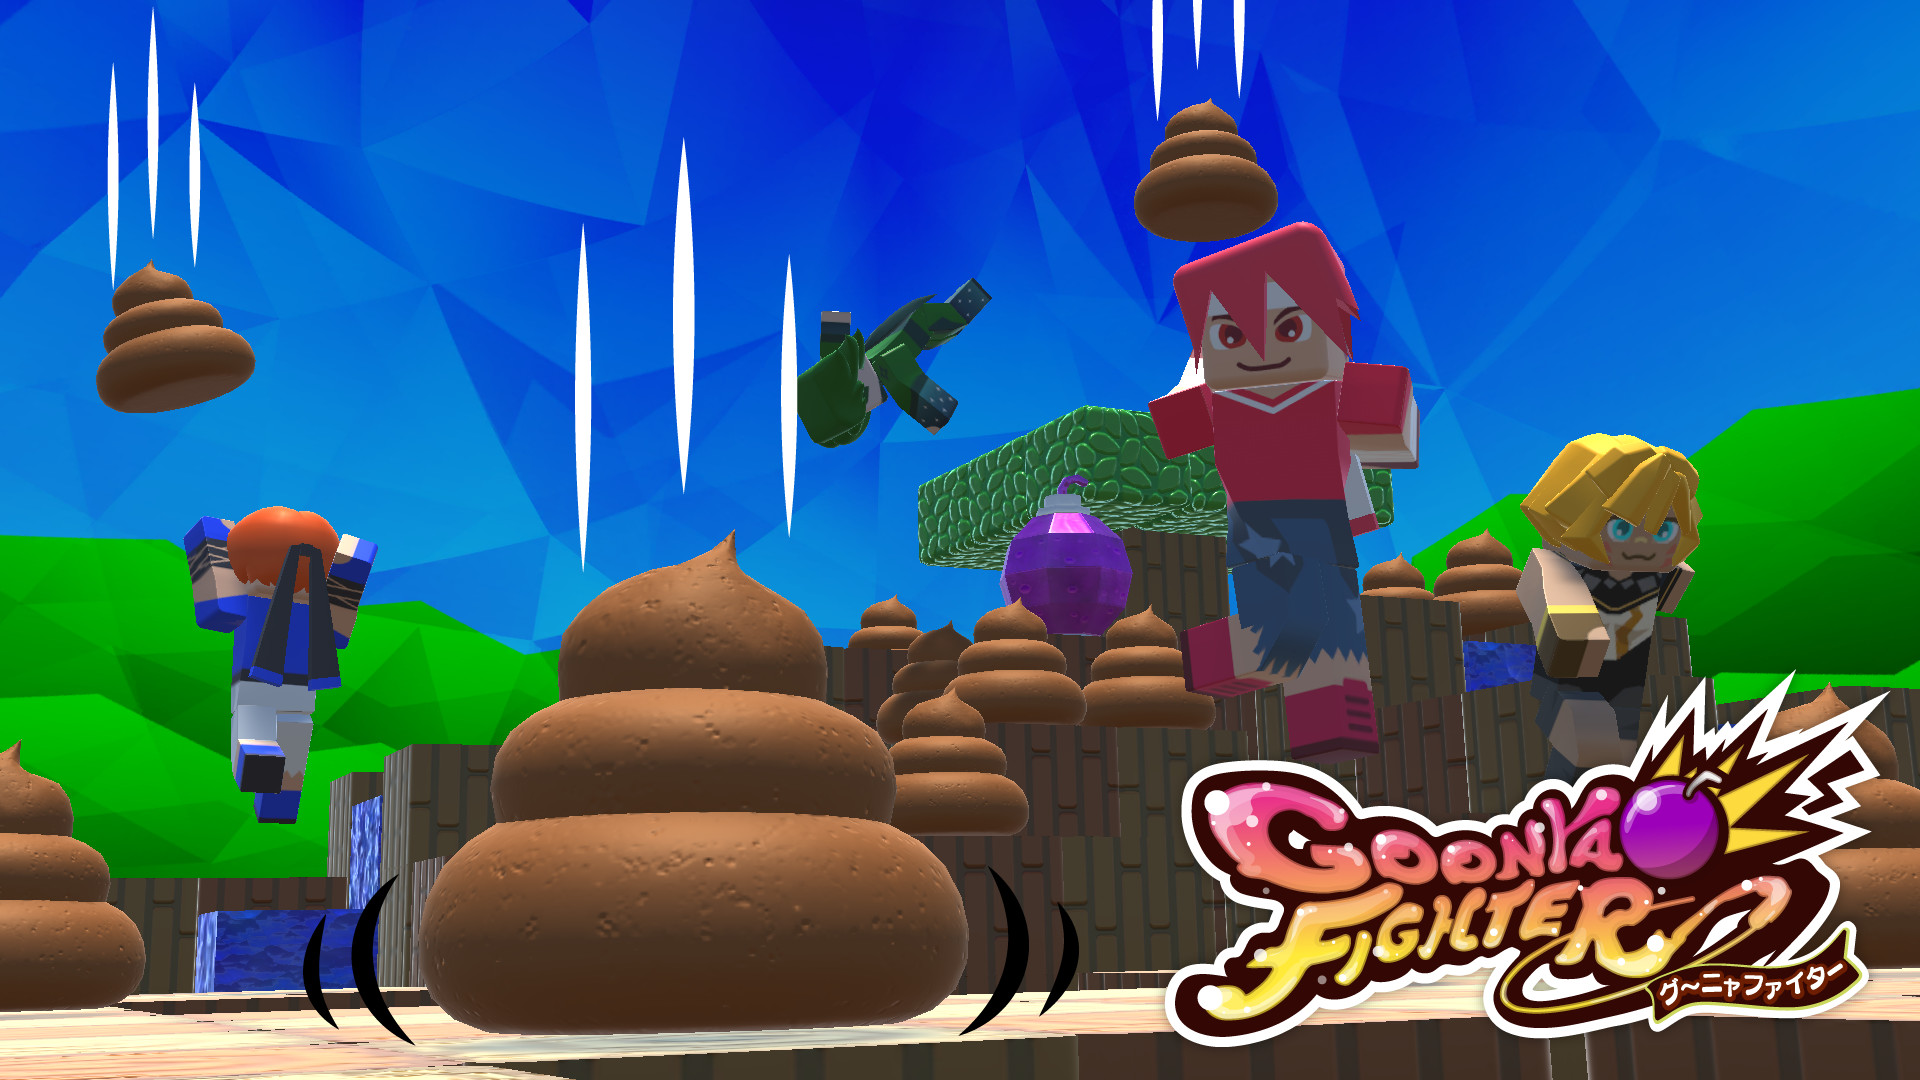 GoonyaFighter - New battle style: "Don't Touch The Poop" Party!!" Featured Screenshot #1